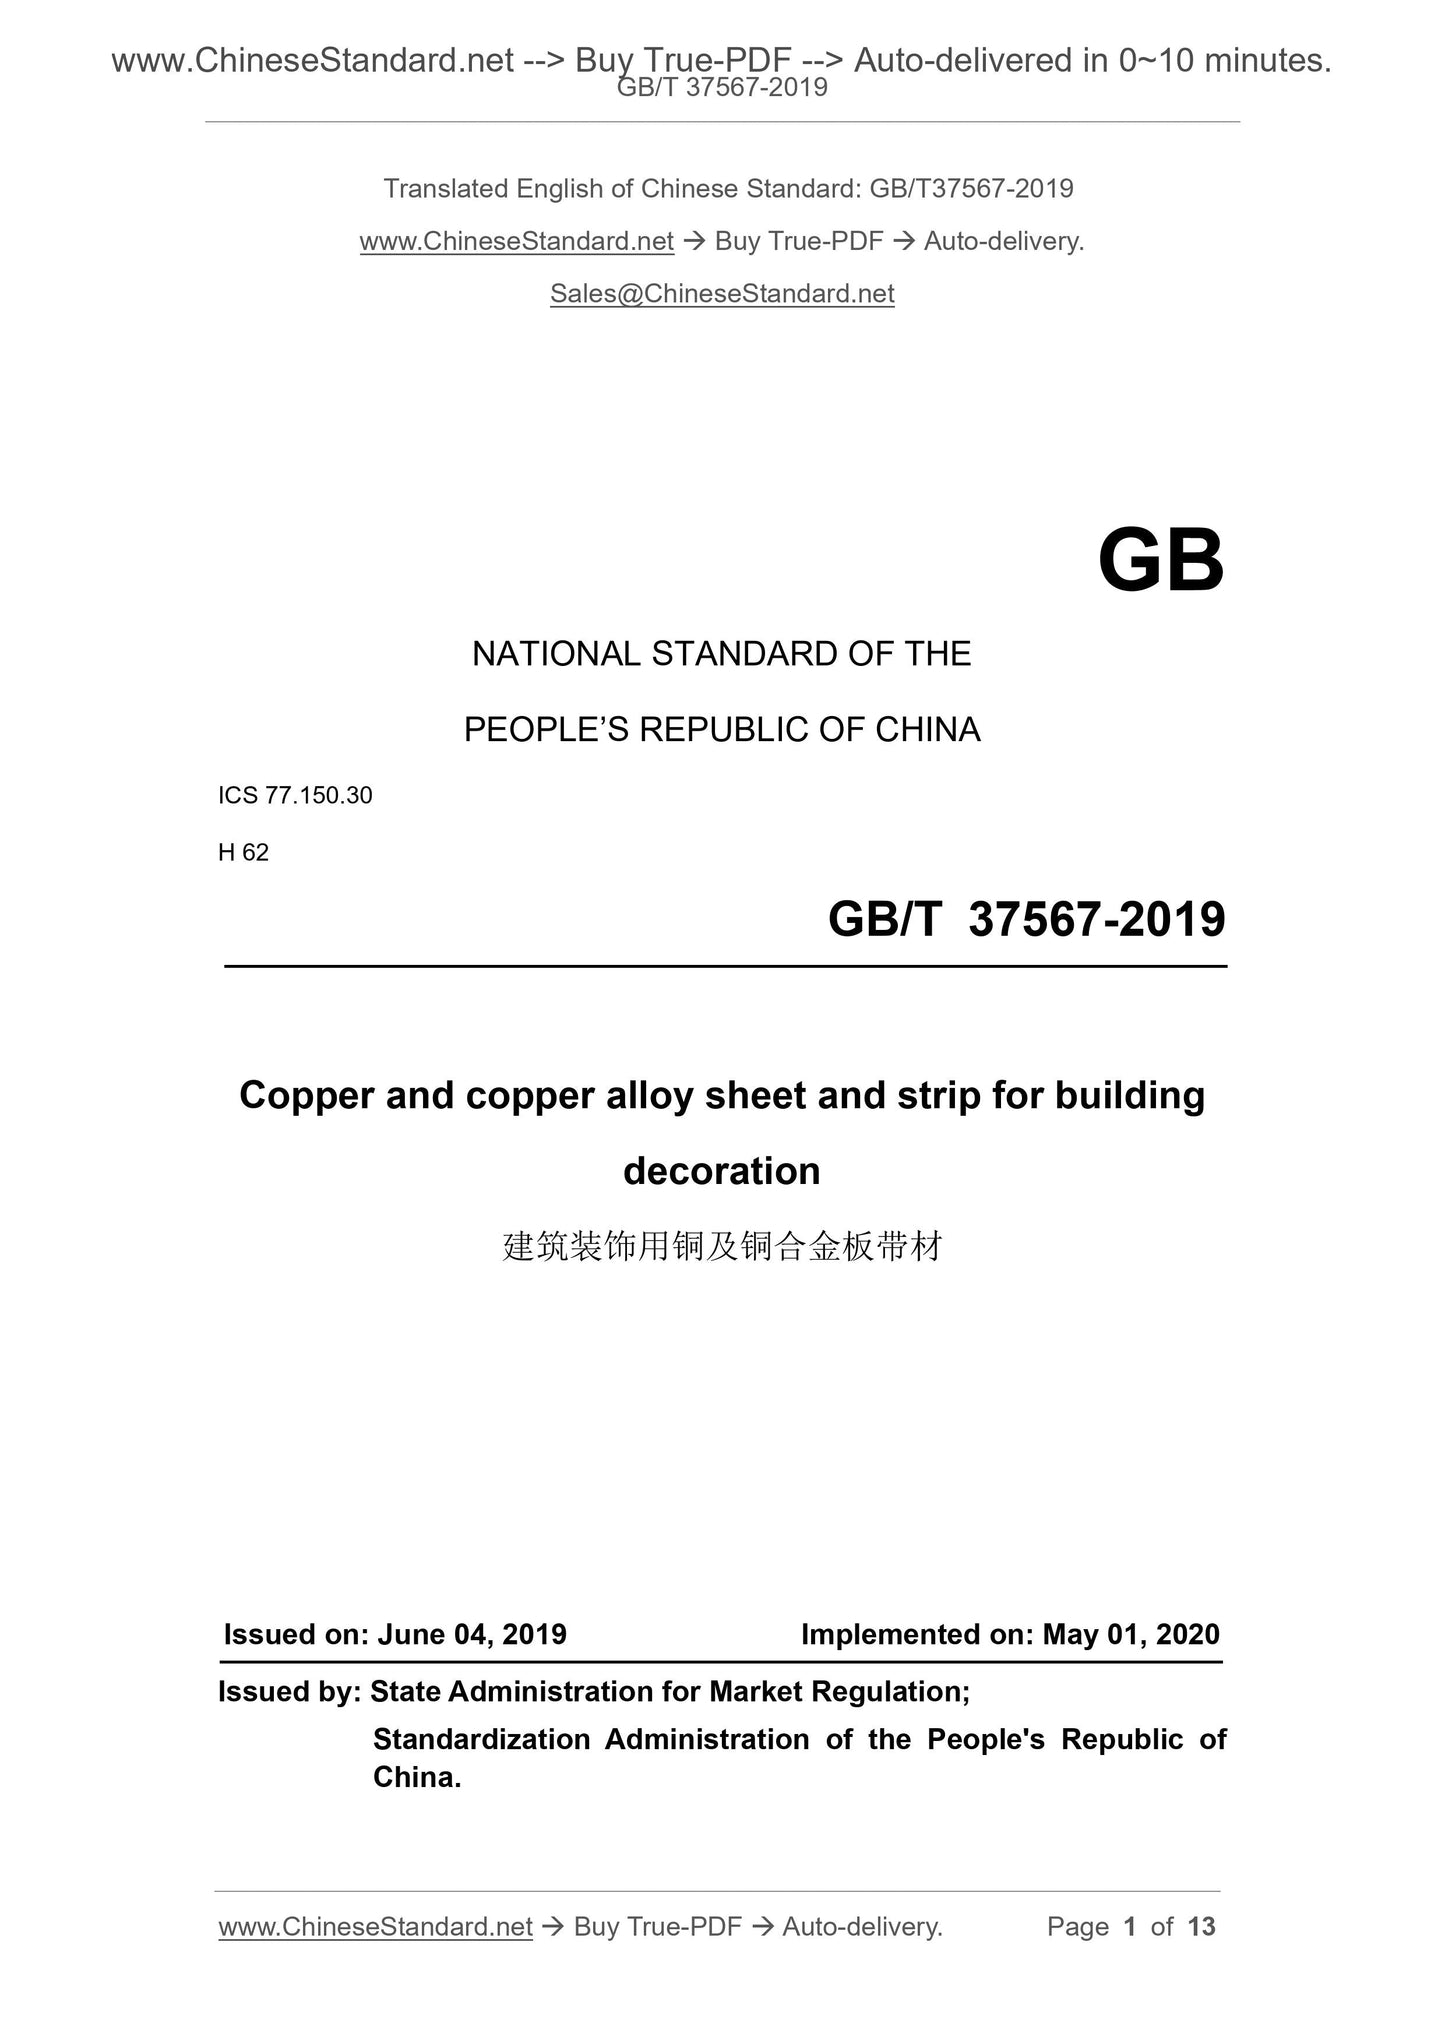 GB/T 37567-2019 Page 1